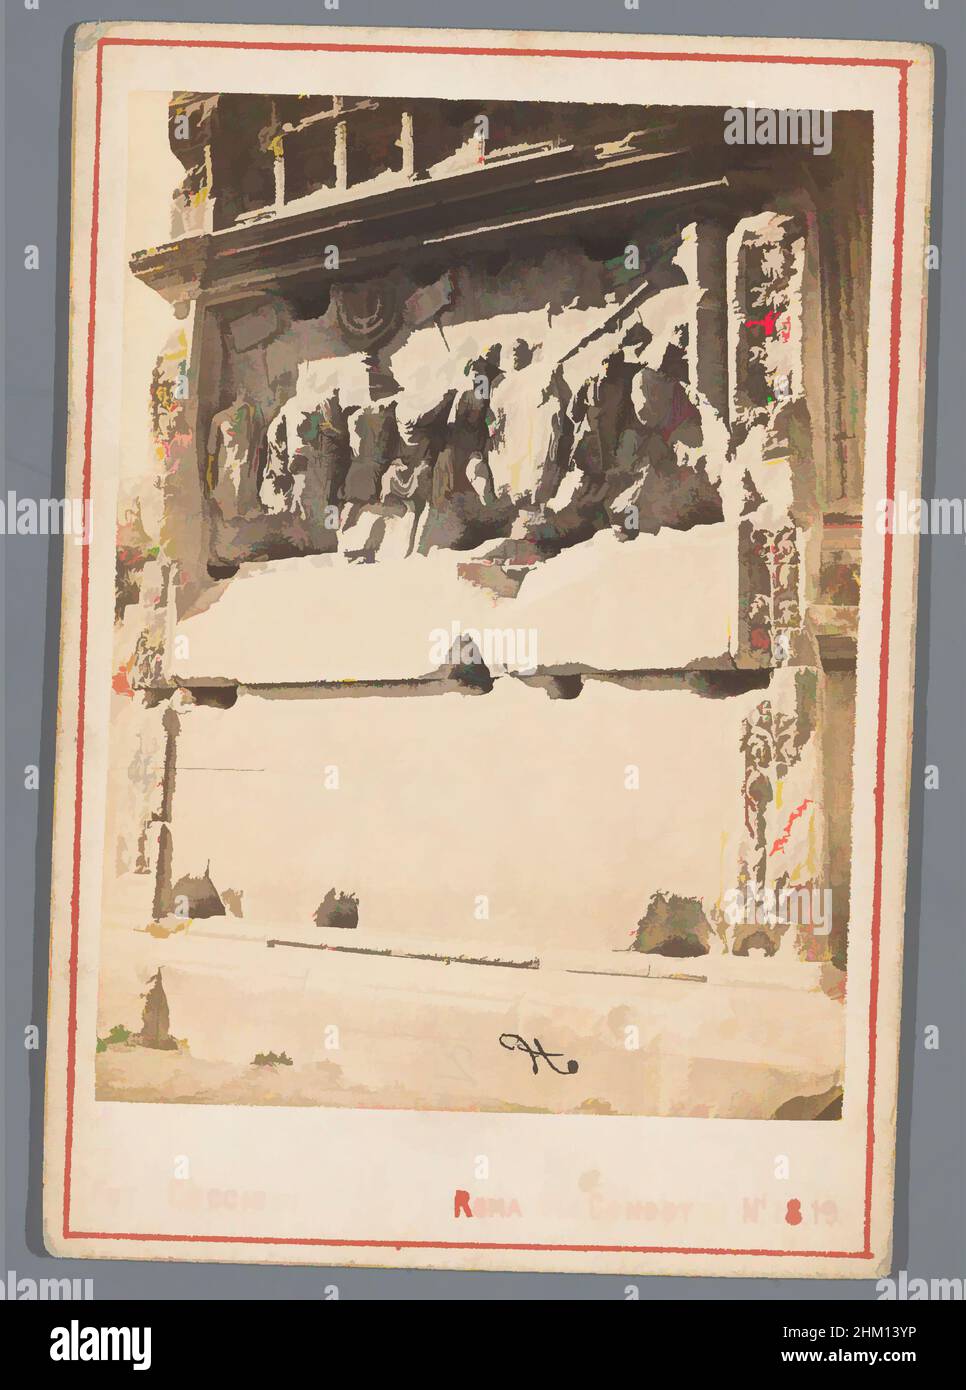 Art inspired by Relief in the Arch of Titus, Rome: war booty from the Temple of Jerusalem, Arc de Triomphe de Titus, Tomasso Cuccioni, Rome, 1855 - 1885, cardboard, paper, albumen print, height 99 mm × width 68 mm, Classic works modernized by Artotop with a splash of modernity. Shapes, color and value, eye-catching visual impact on art. Emotions through freedom of artworks in a contemporary way. A timeless message pursuing a wildly creative new direction. Artists turning to the digital medium and creating the Artotop NFT Stock Photo